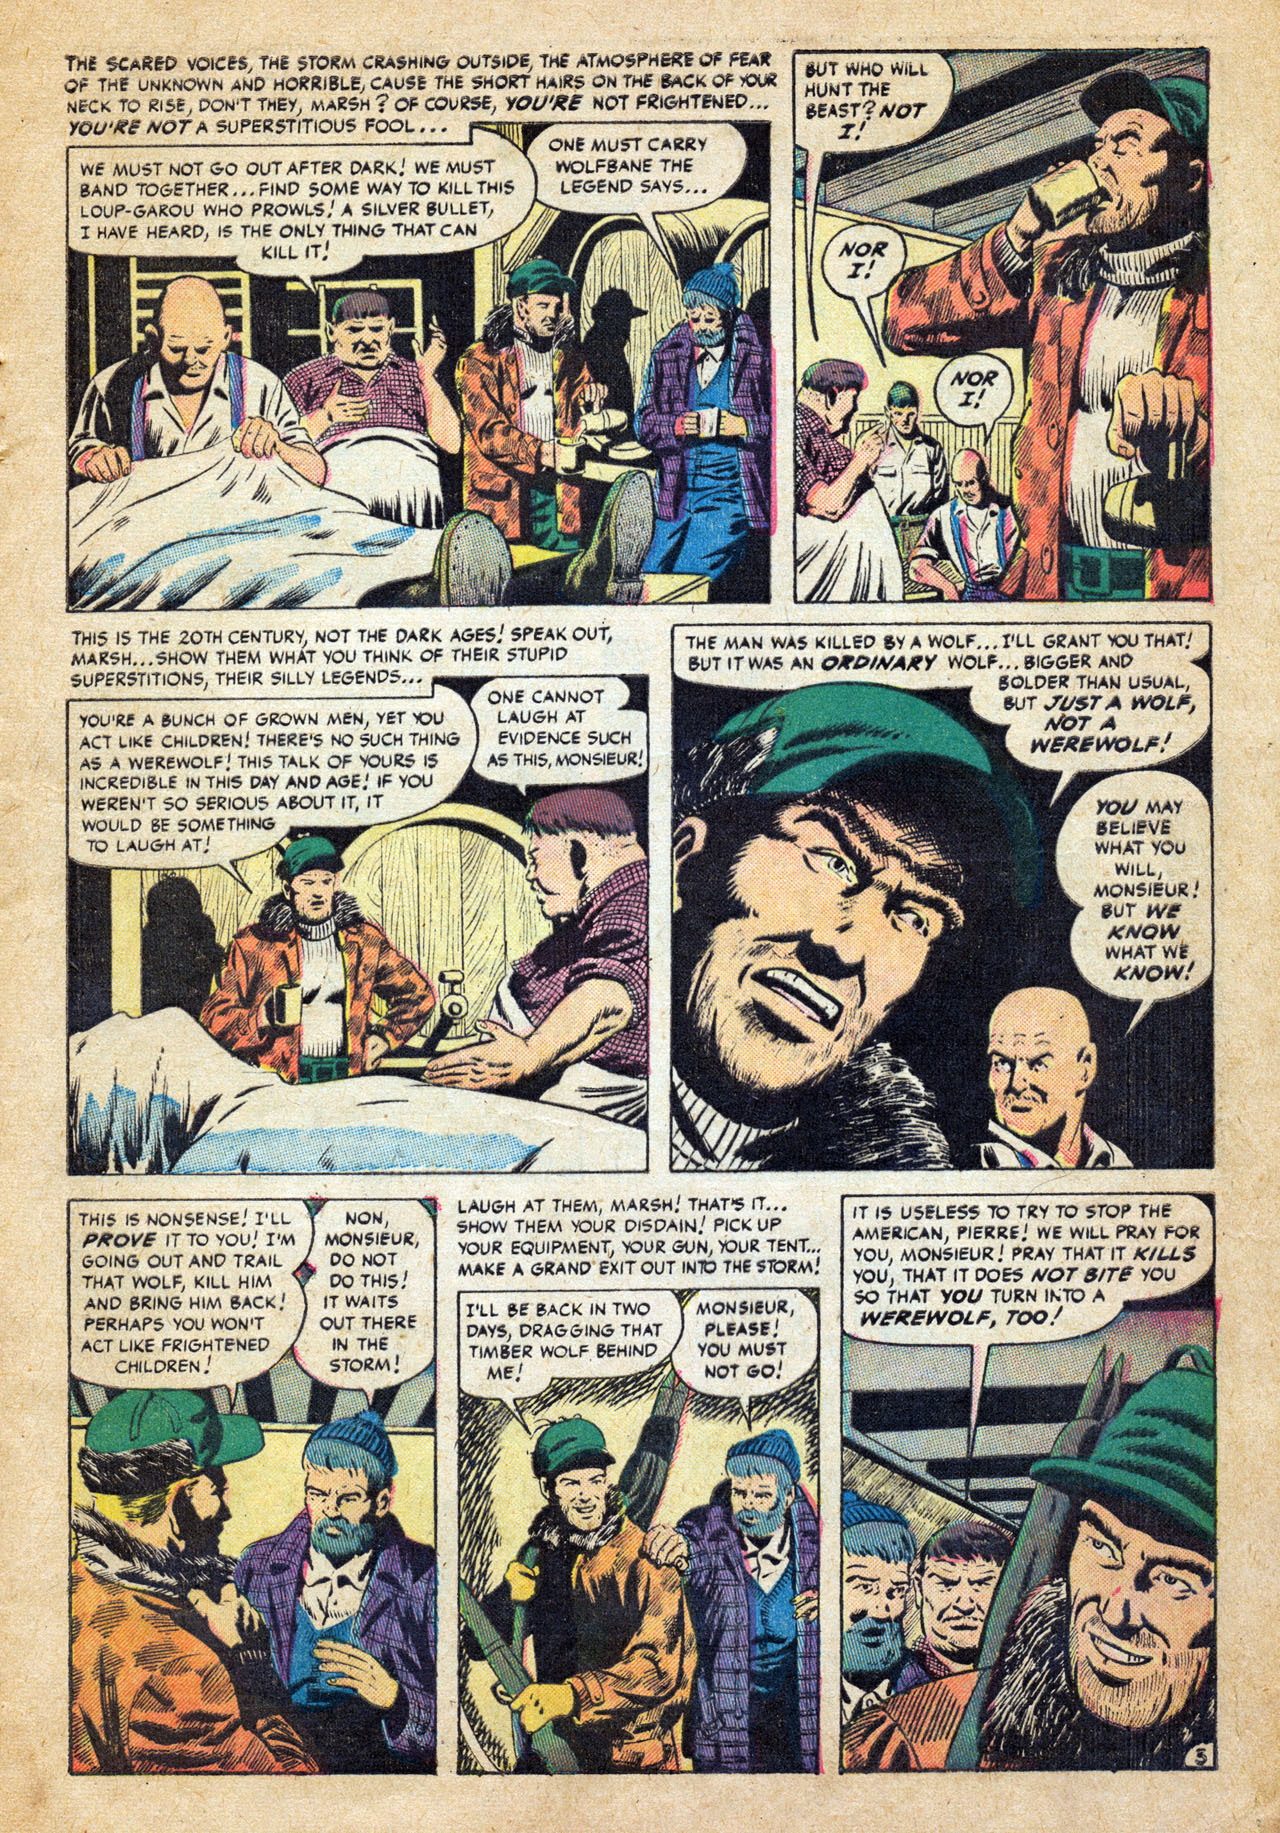 Marvel Tales (1949) 117 Page 4